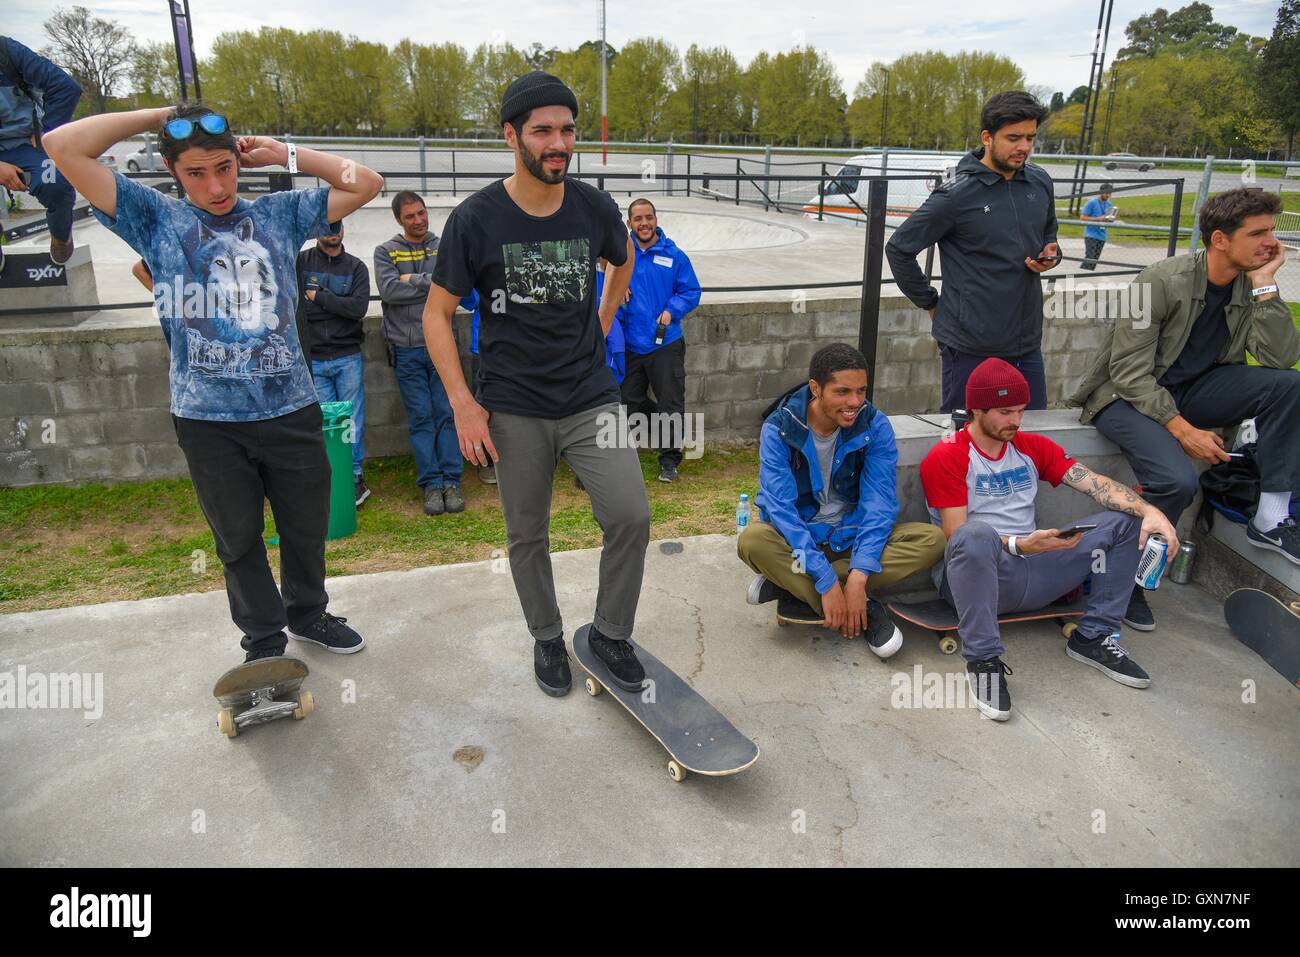 Buenos Aires, Argentina. 16 Sept, 2016. Emerica skateboard team demo at Tecnopolis in Buenos Aires, Argentina. Credit:  Anton Velikzhanin/Alamy Live News Stock Photo